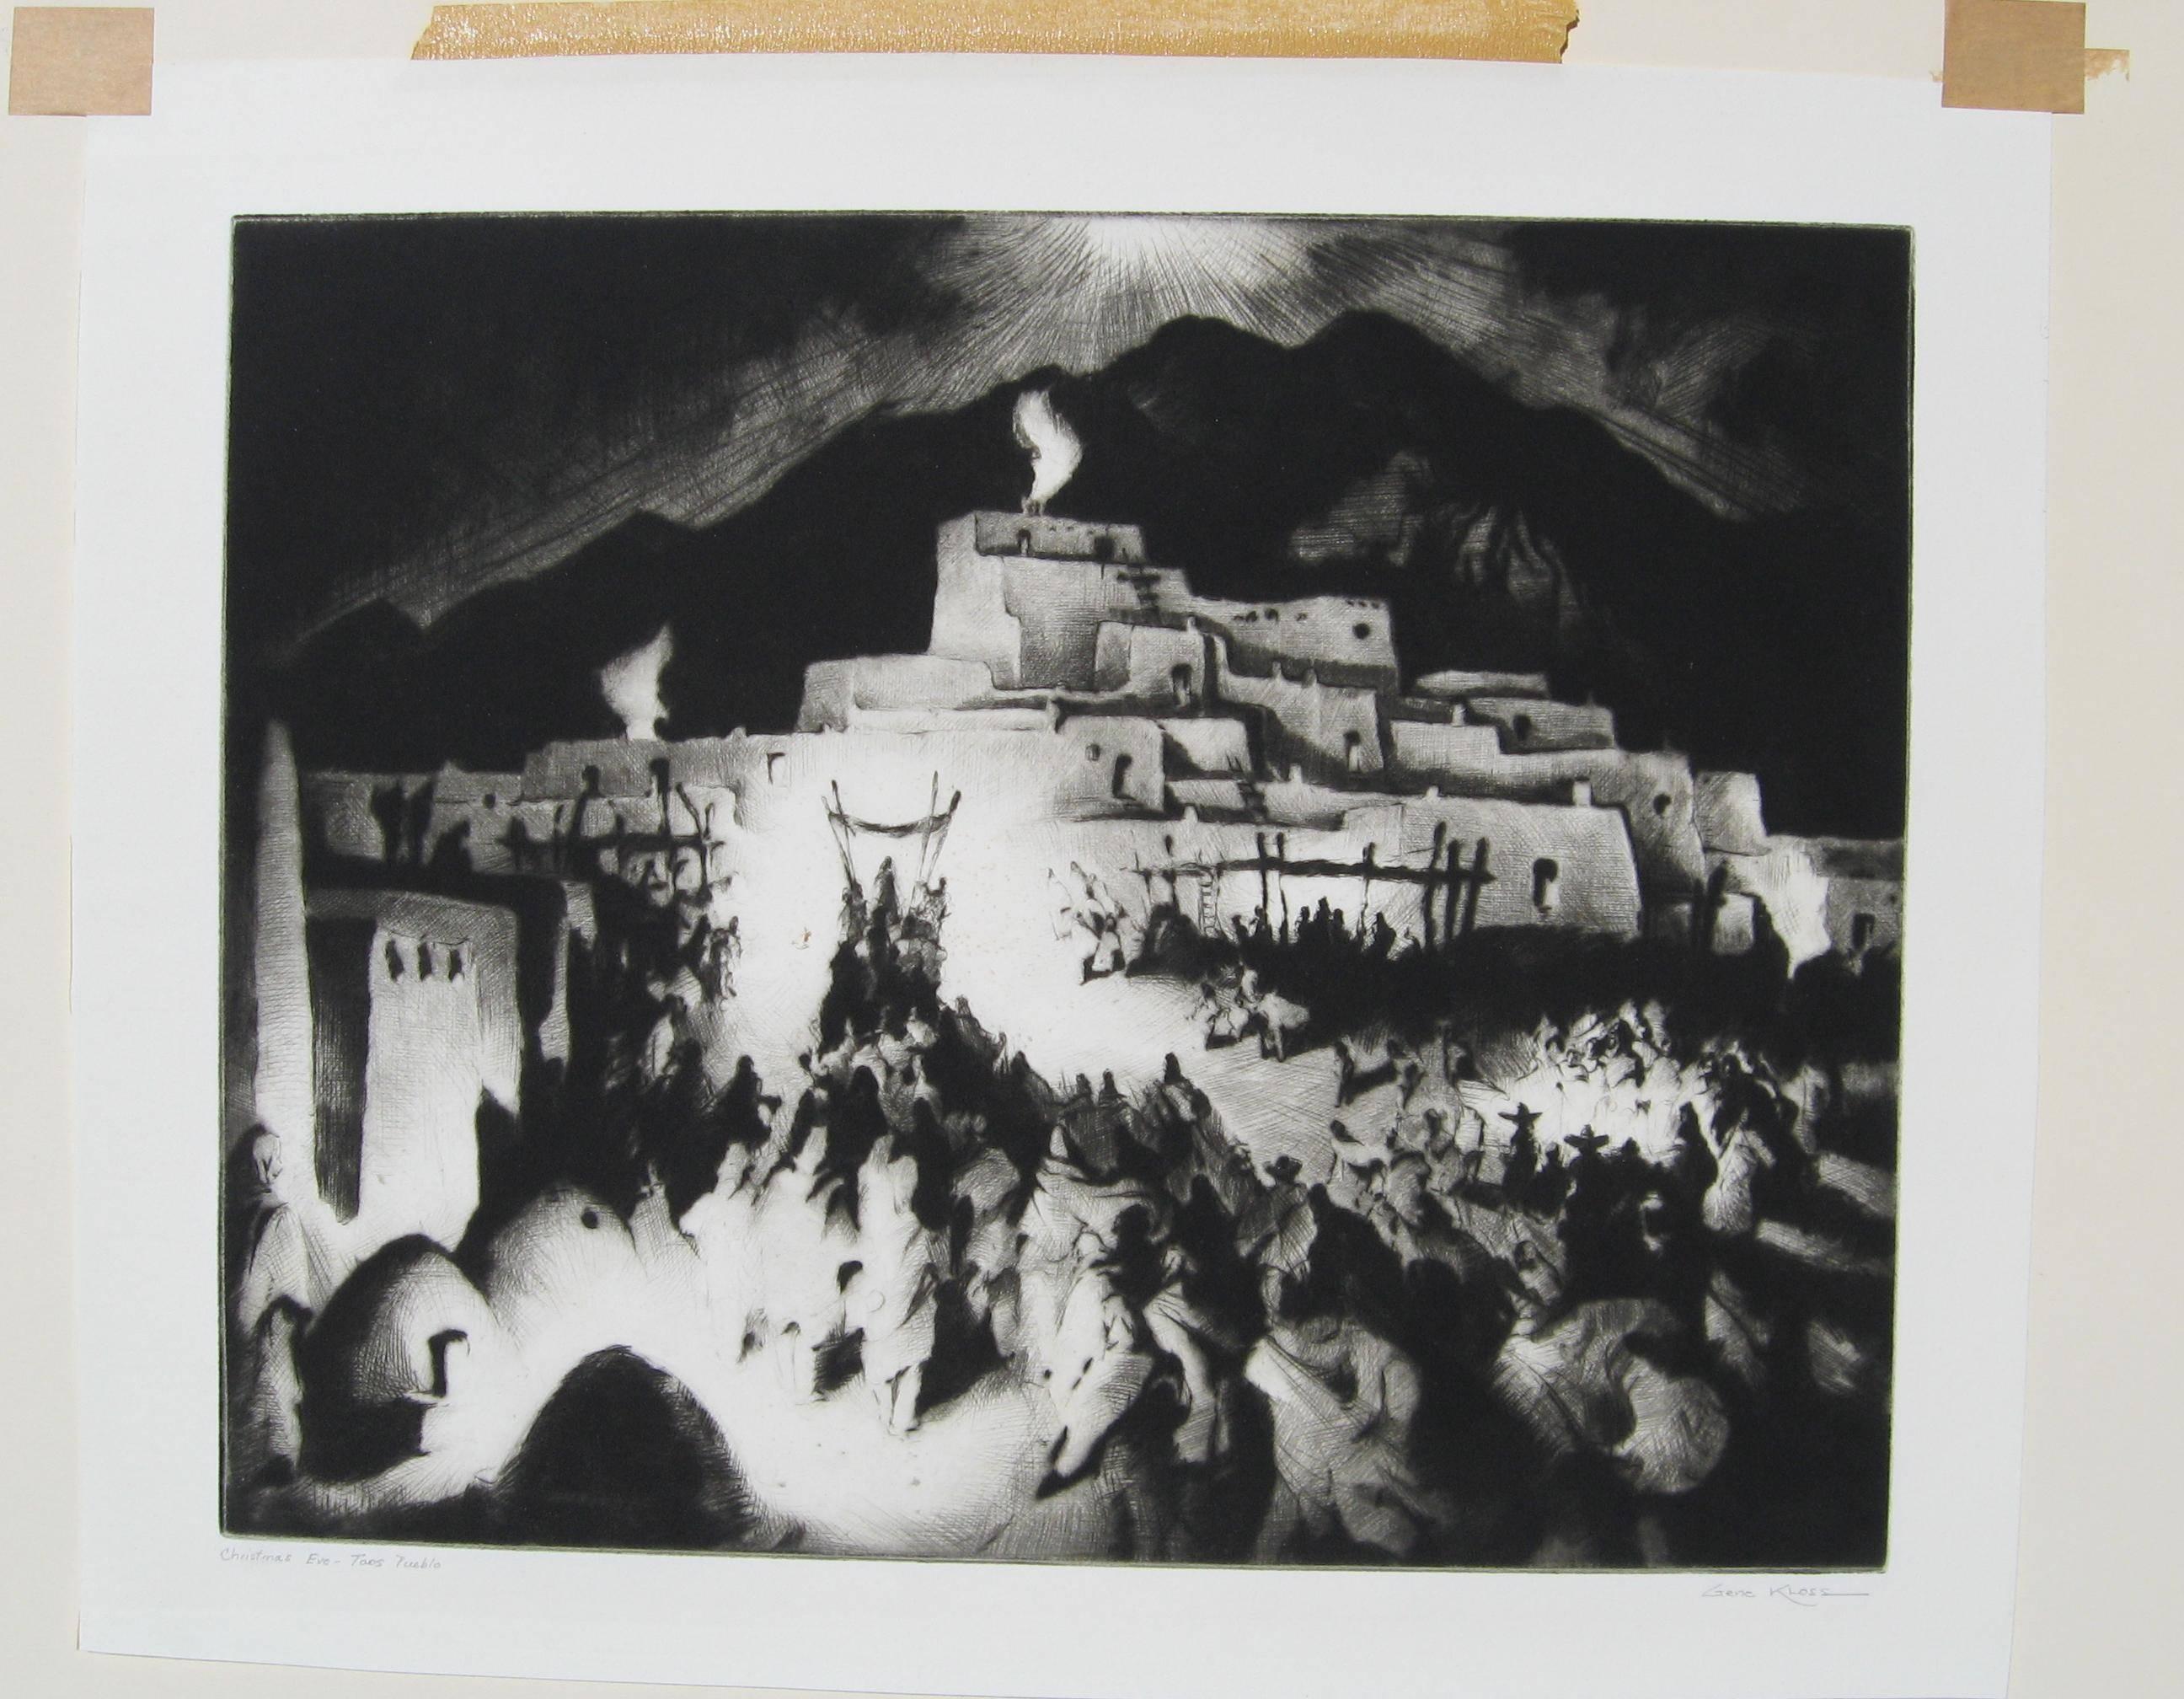 Drypoint etching by famous Taos Artist Gene Kloss (1903-1996).
Edition of 75. Titled: Christmas Eve - Taos Pueblo.
Image measures: 12